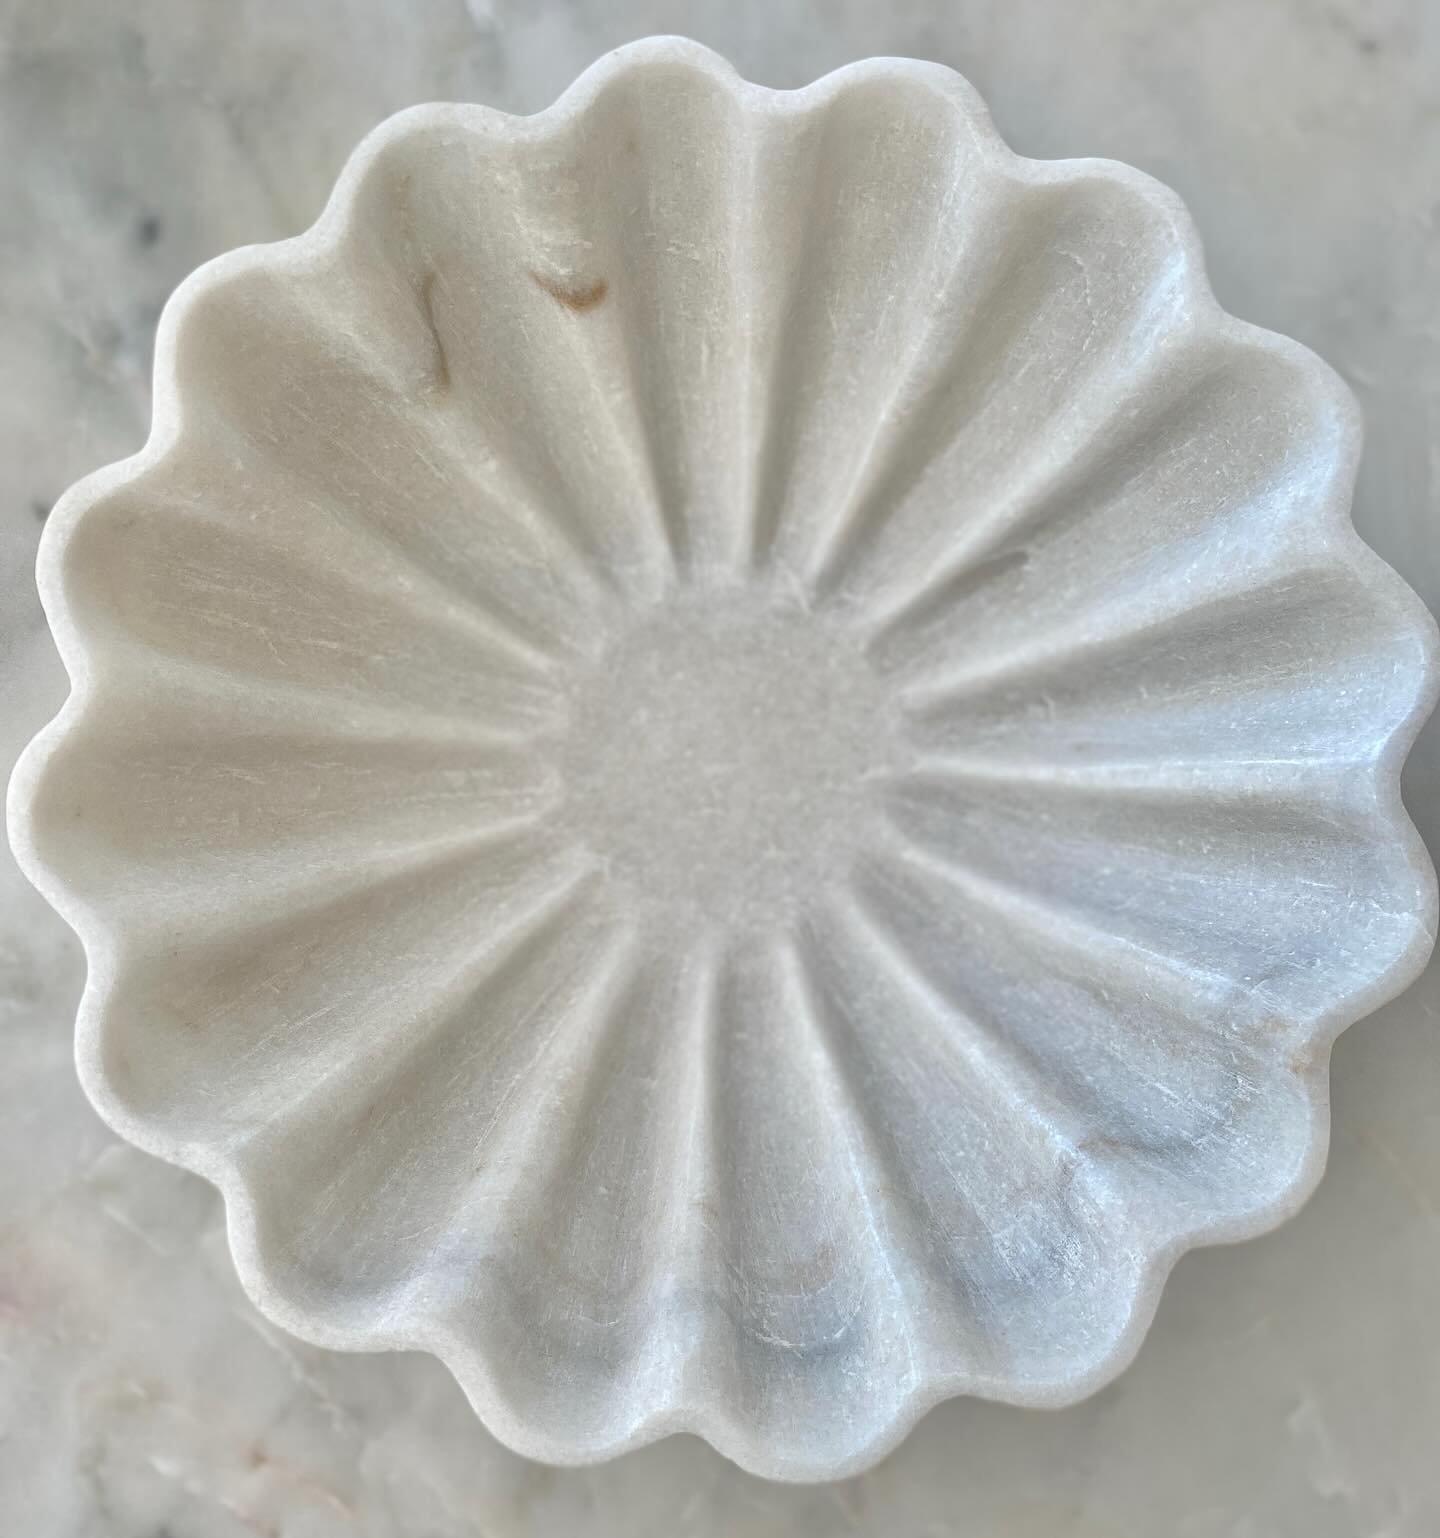 Gorgeous fluted marble bowl. How would you use it?
&bull;
&bull;
&bull;
&bull;
&bull;

#islandlife #soulhouse #soulhousekeywest
#shoplocal #retailkeywest #retail  #creative #homegoods #apparel 
#supportlocalbusiness
#keywestshopping #instamood #homed